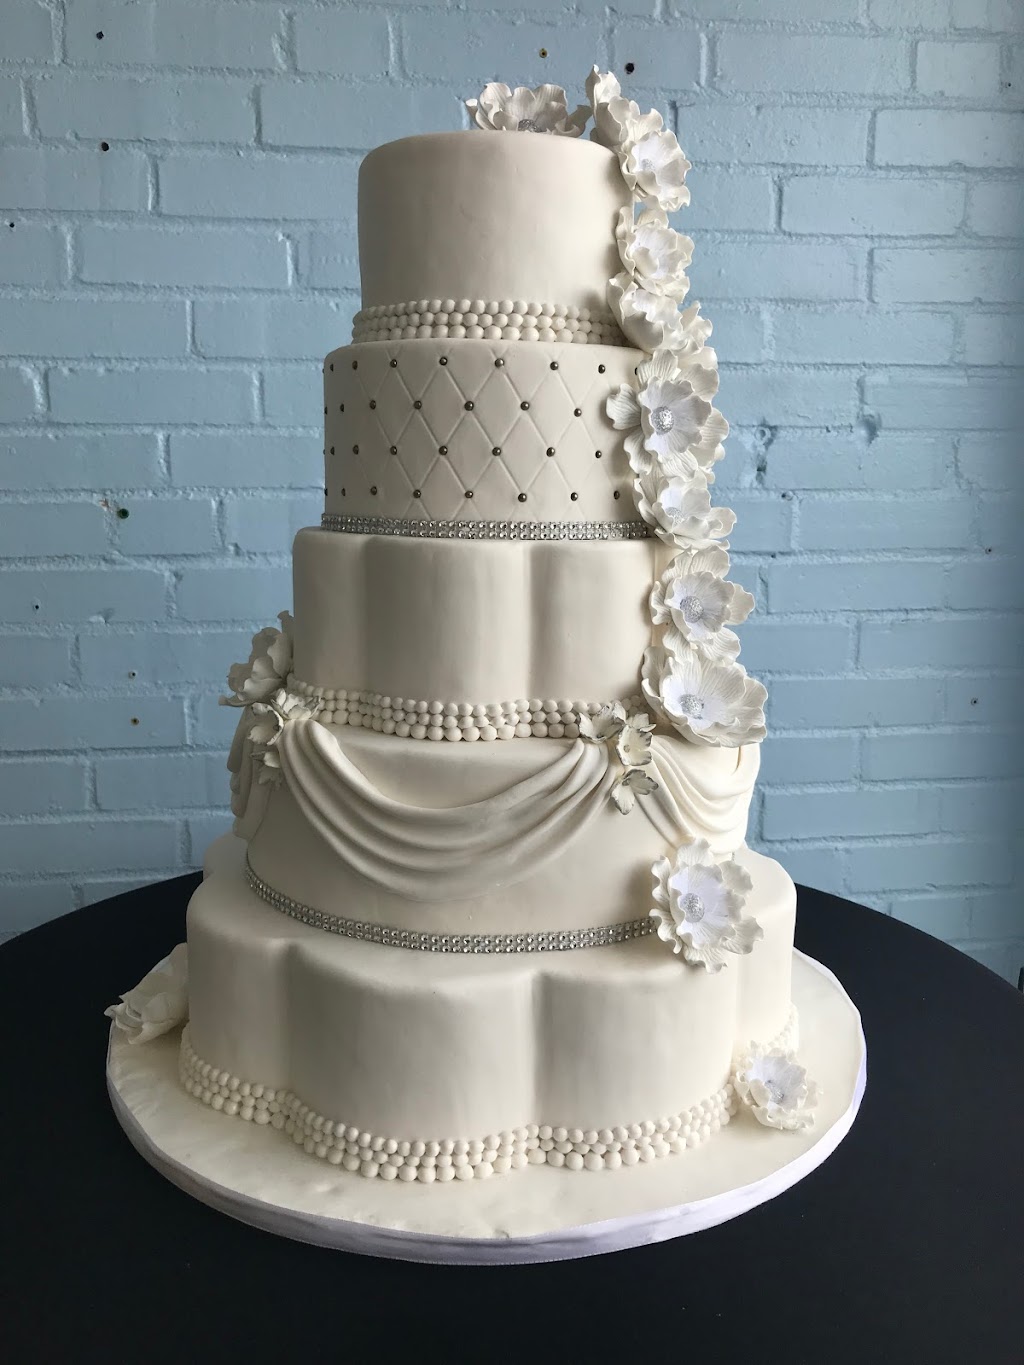 Amys Creative Cakes | 2045 Valley View Dr, Quakertown, PA 18951 | Phone: (215) 529-5763